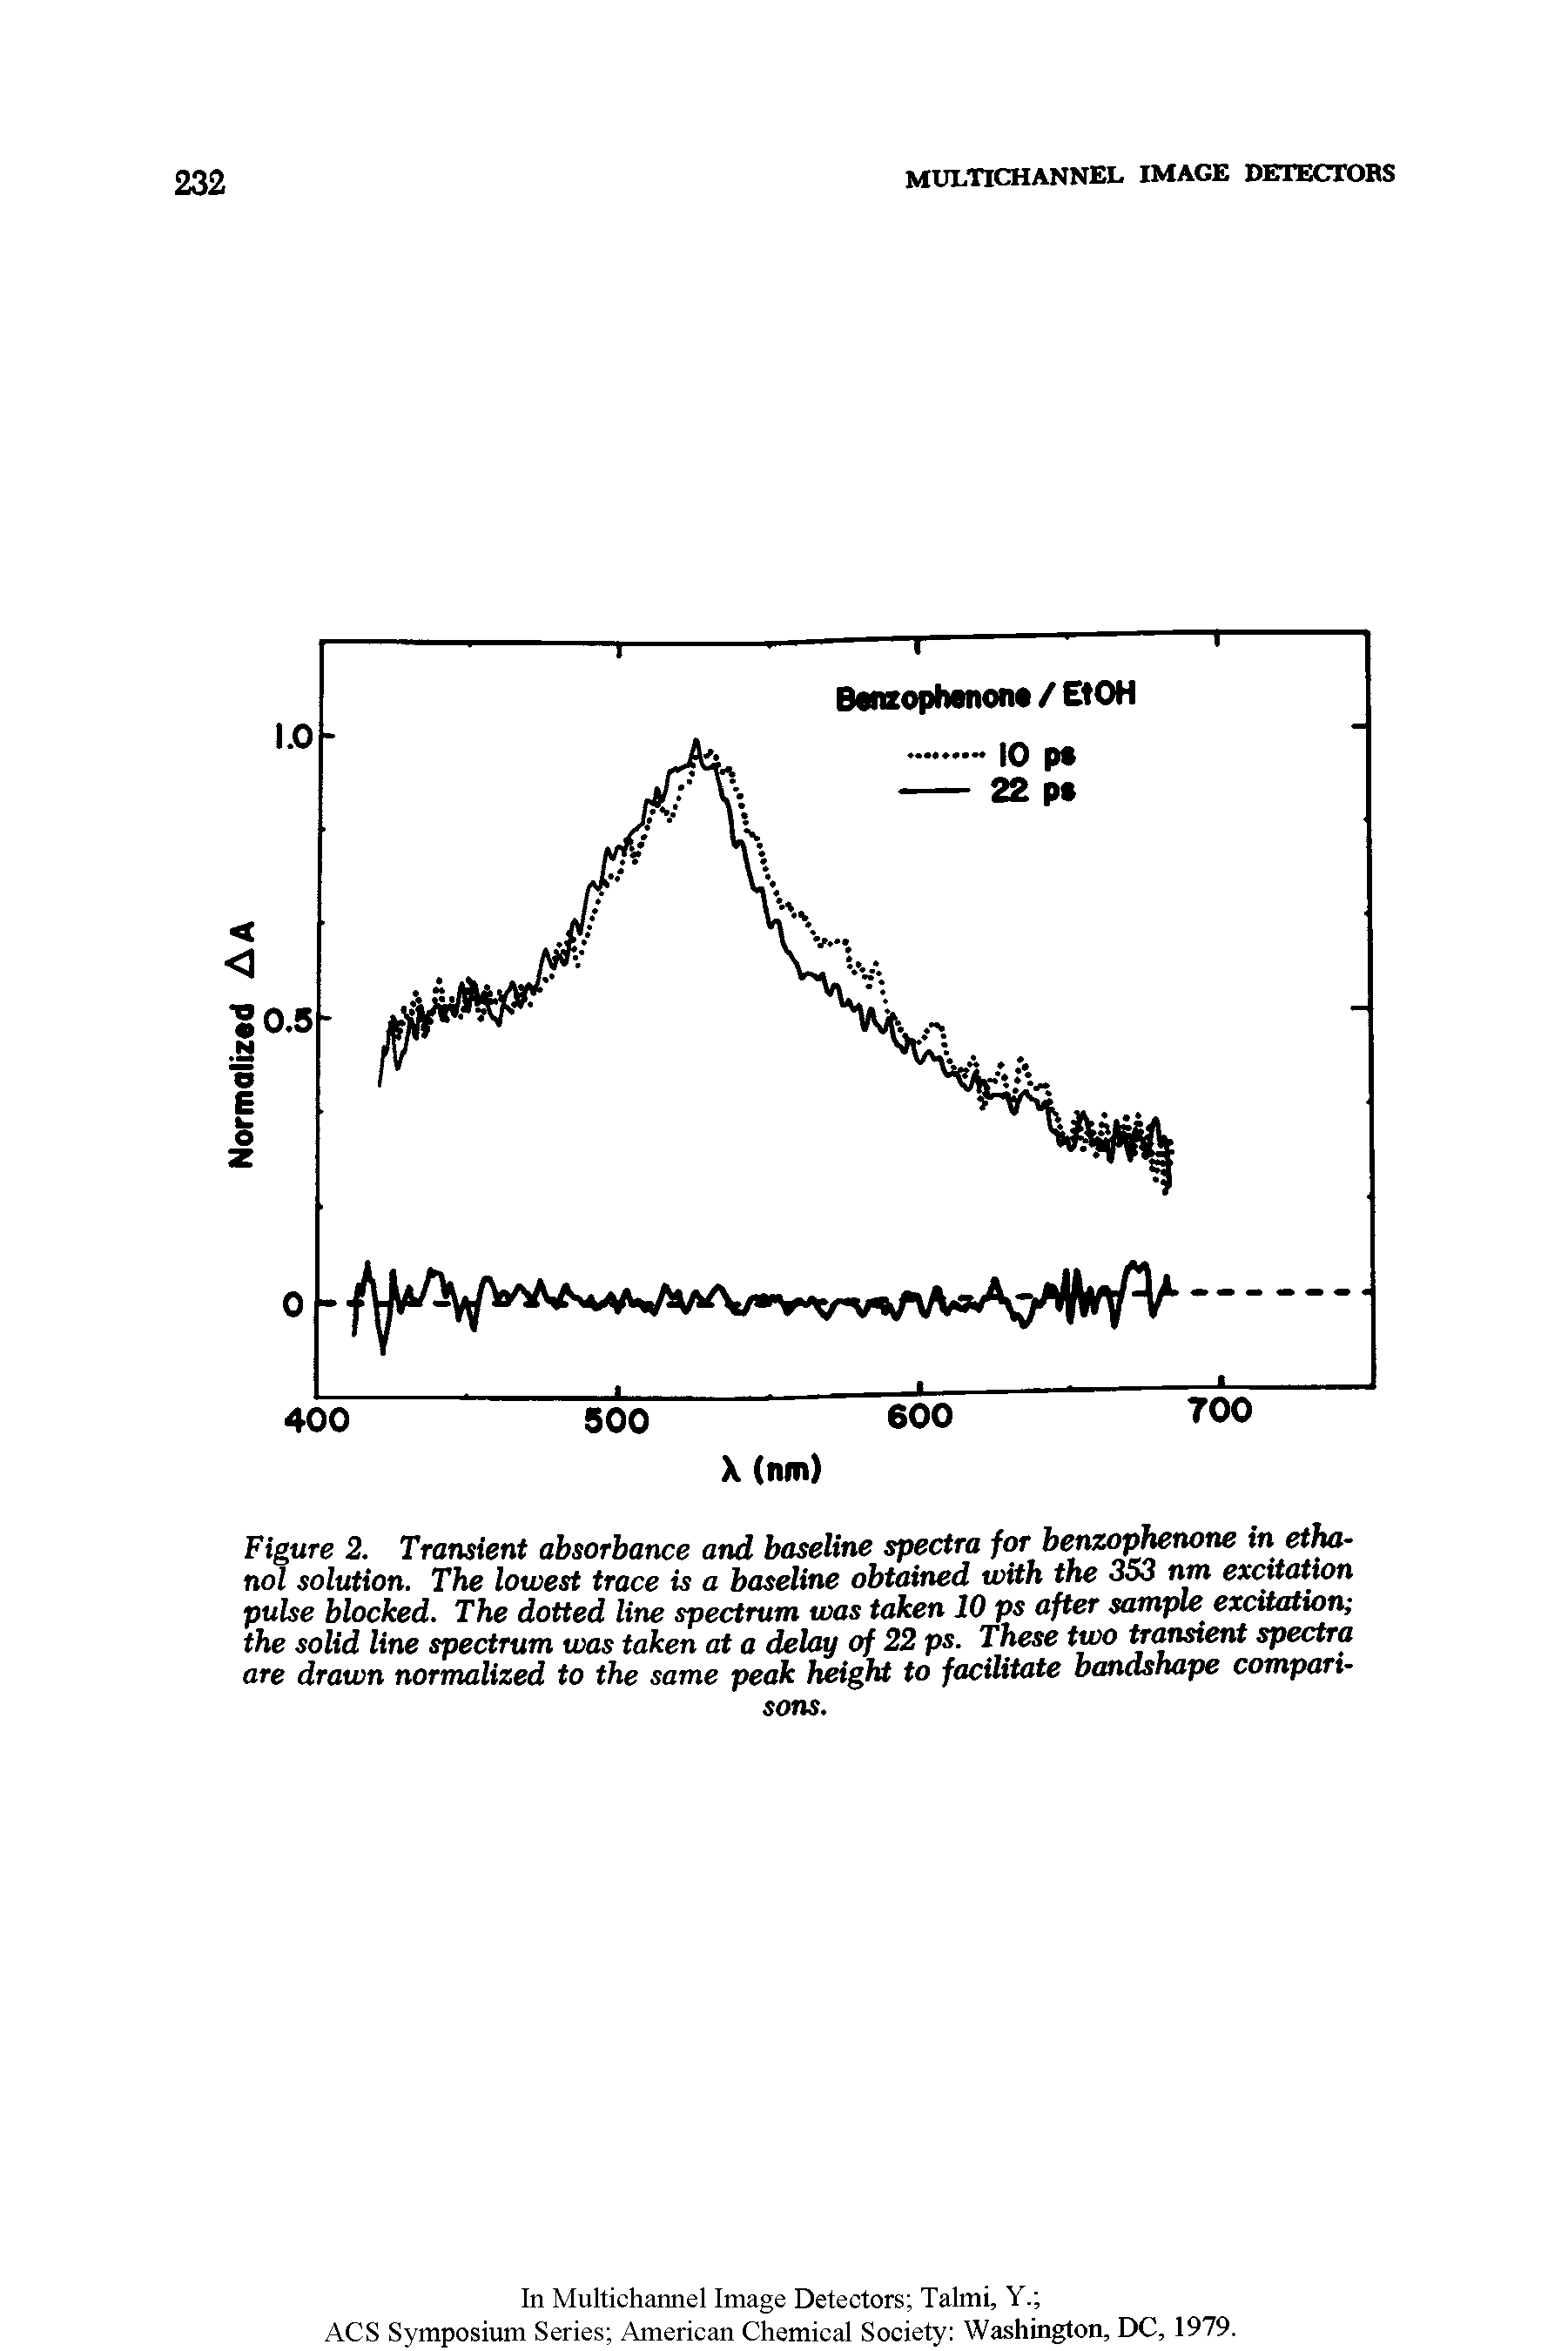 Figure 2. Transient absorbance and baseline spectra for benzophenone in ethanol solution. The lowest trace is a baseline obtained with the 353 nm excitation pulse blocked. The dotted line spectrum was taken 10 ps after sample excitation the solid line spectrum was taken at a delay of 22 ps. These two transient spectra are drawn normalized to the same peak height to facilitate bandshape comparisons.